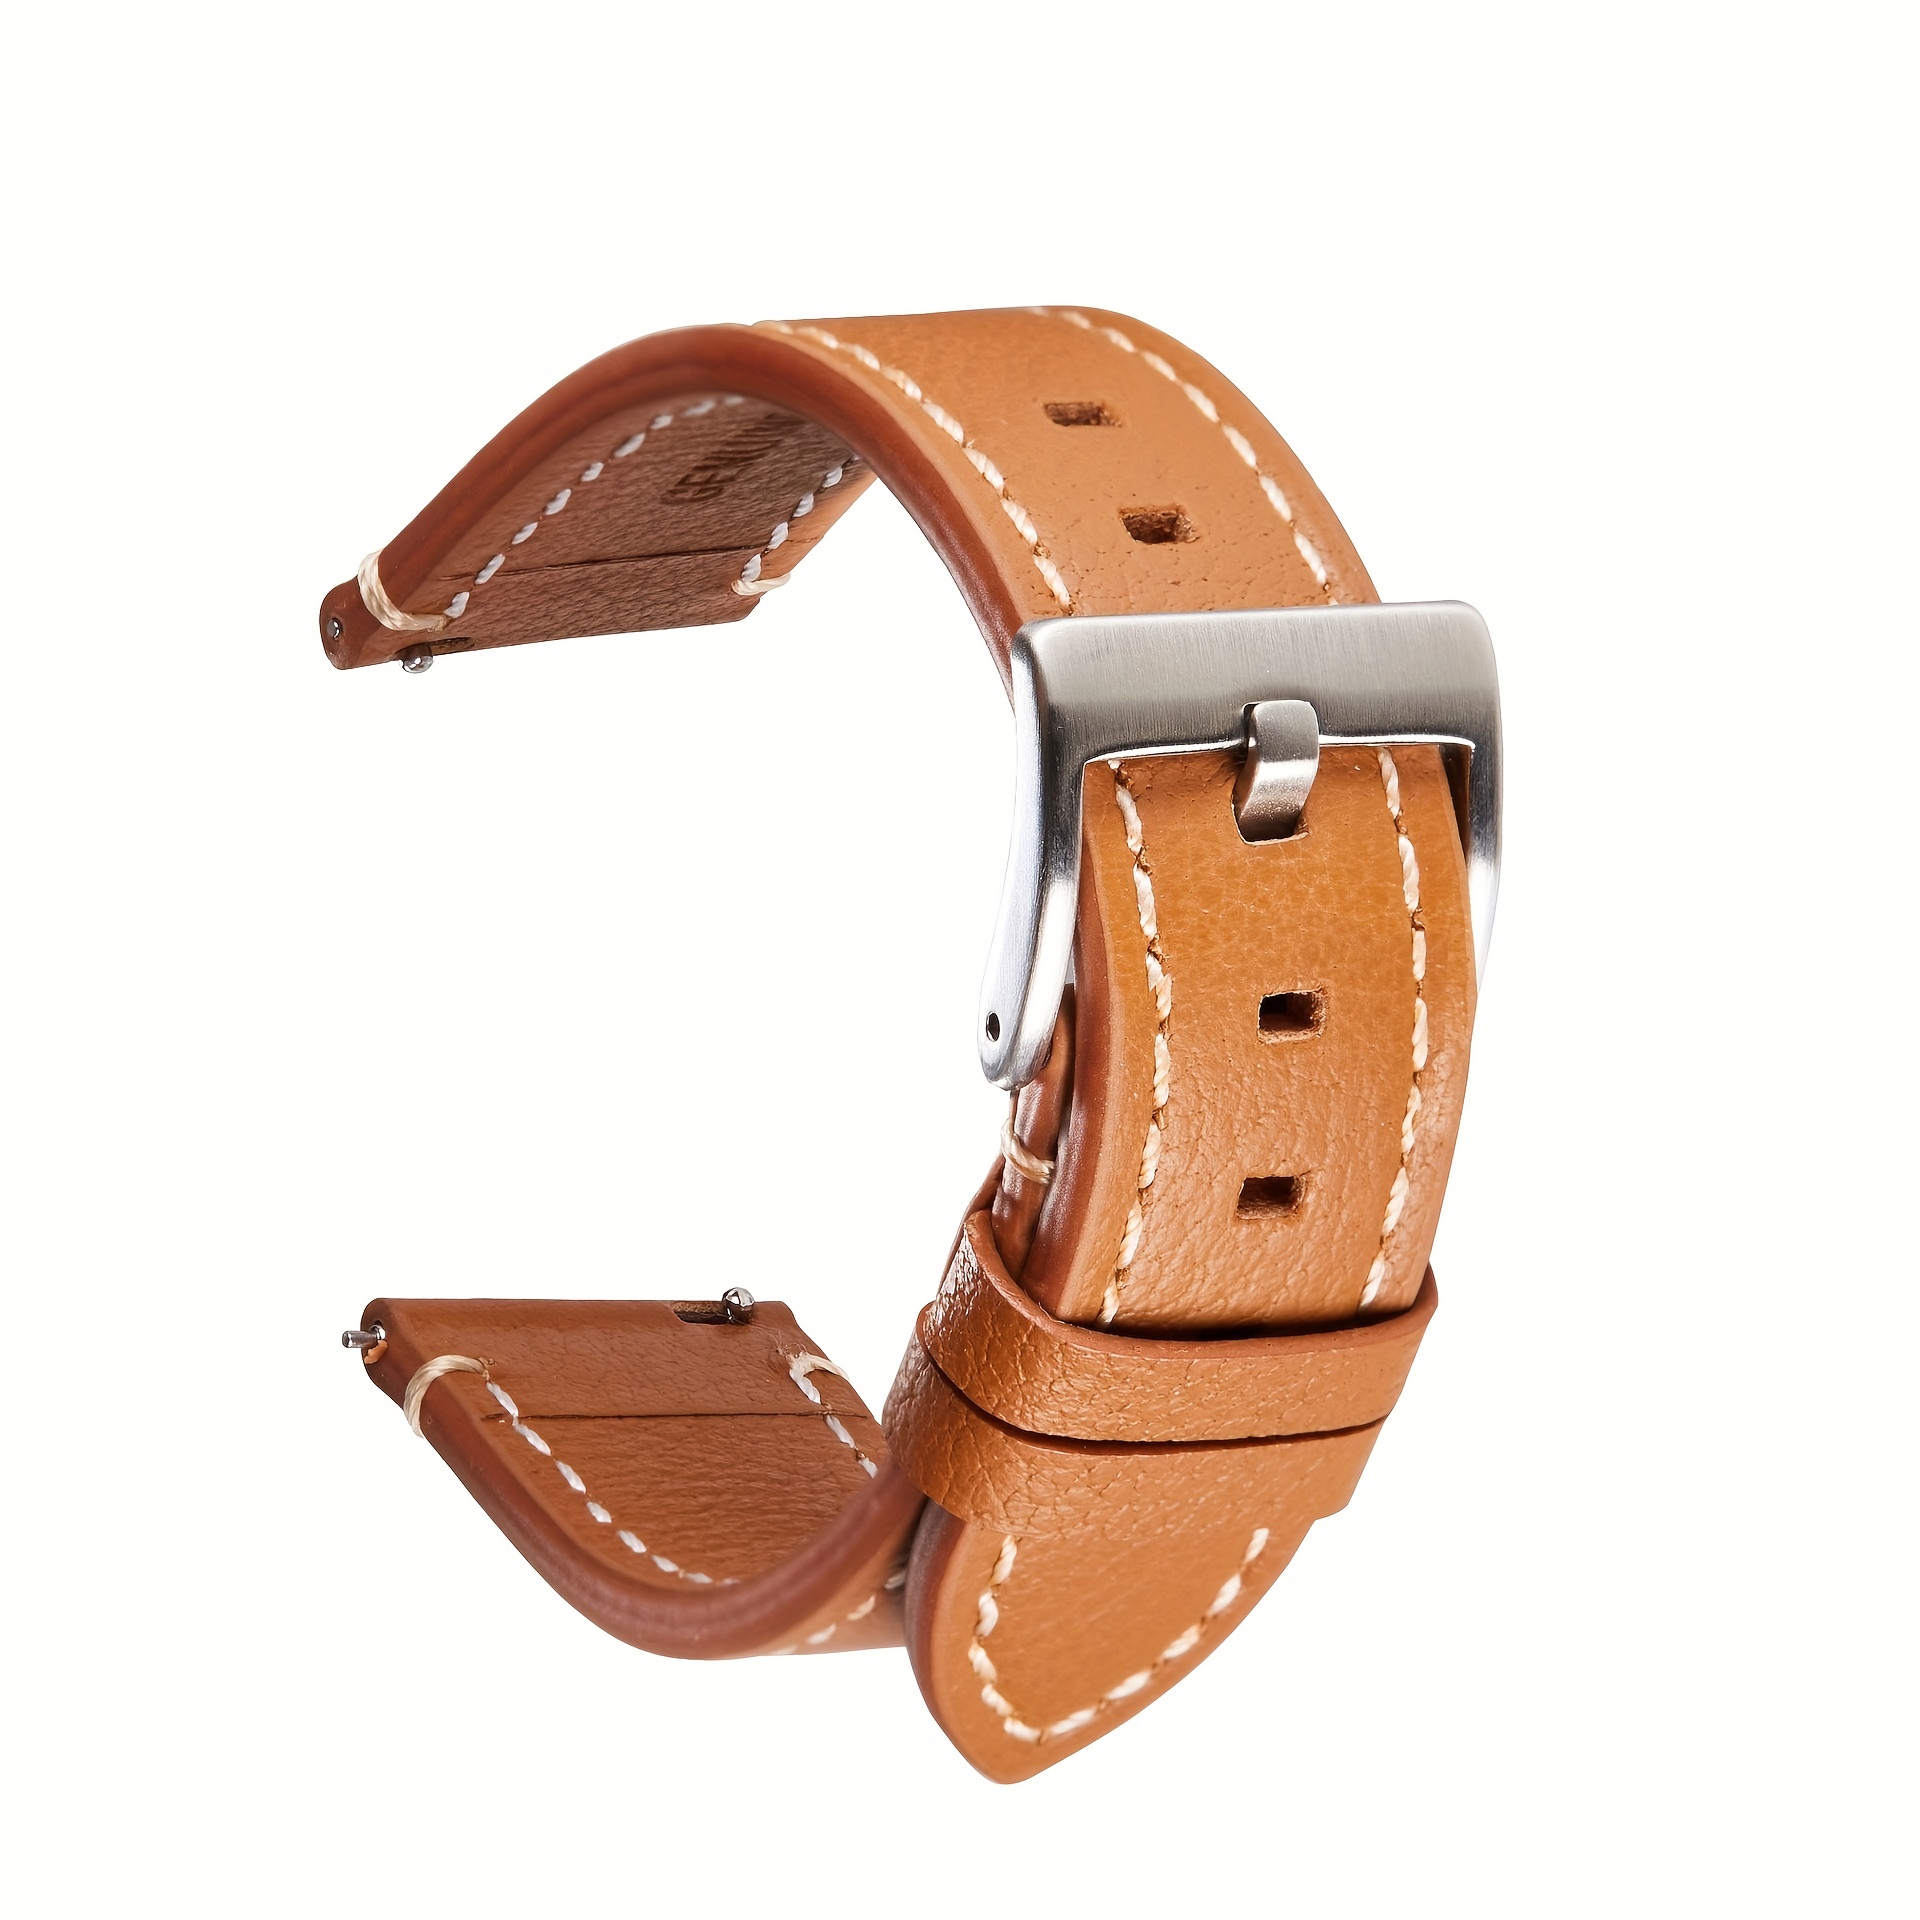 1pc Vintage Leather Strap Alligator Calf Leather Replacement Strap Stainless Steel Buckle Bracelet Smart Quick Release Watch Strap Men Black Brown